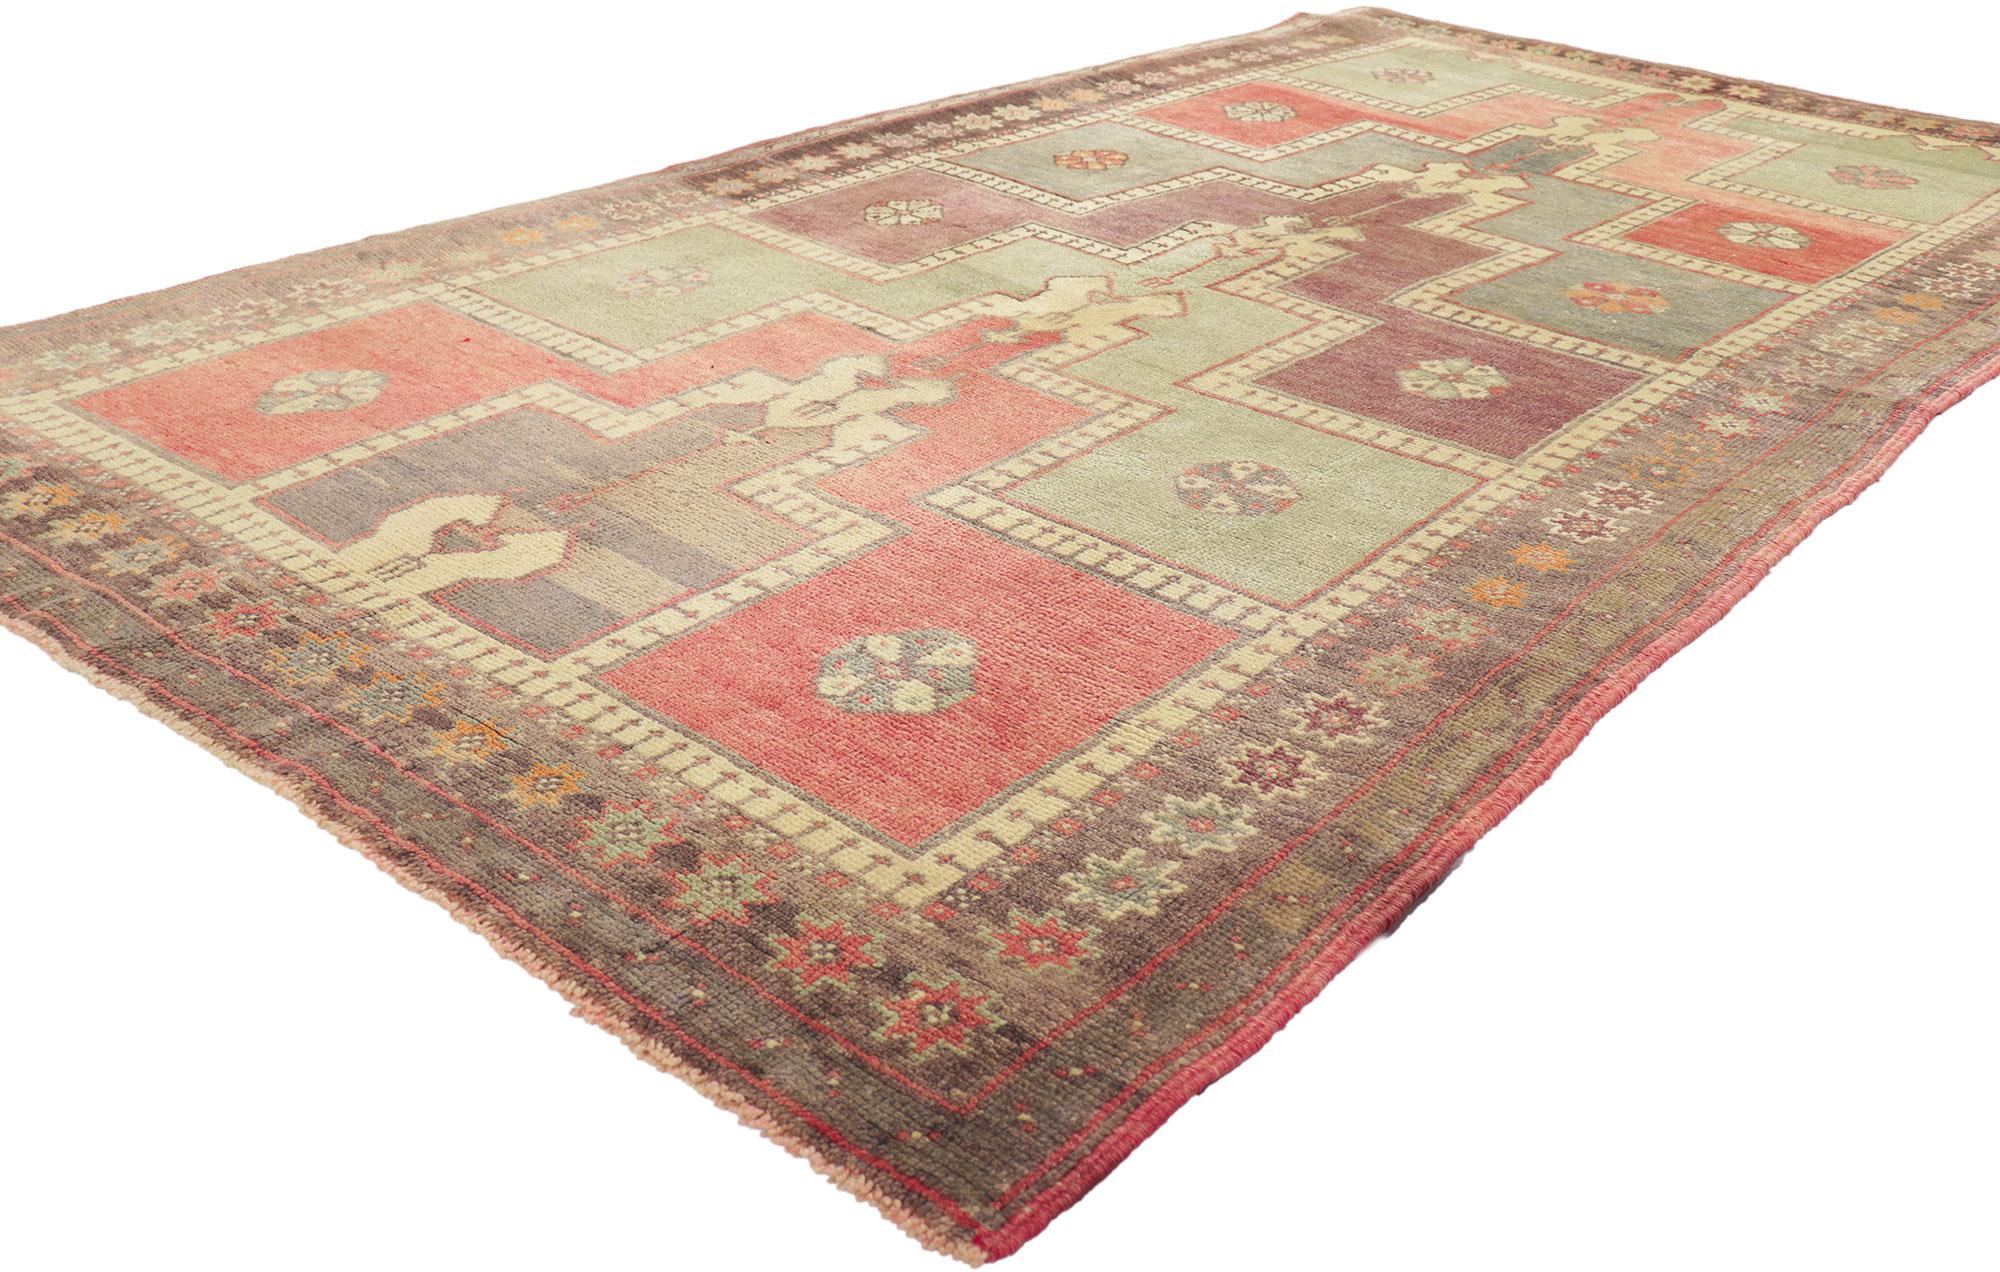 51806 Vintage Turkish Prayer Rug, 04’02 x 07’10. Turkish prayer rugs are specialized carpets used by Muslims during their prayers, featuring a design with a niche, or mihrab, pointing towards the Kaaba in Mecca. These rugs are renowned for their